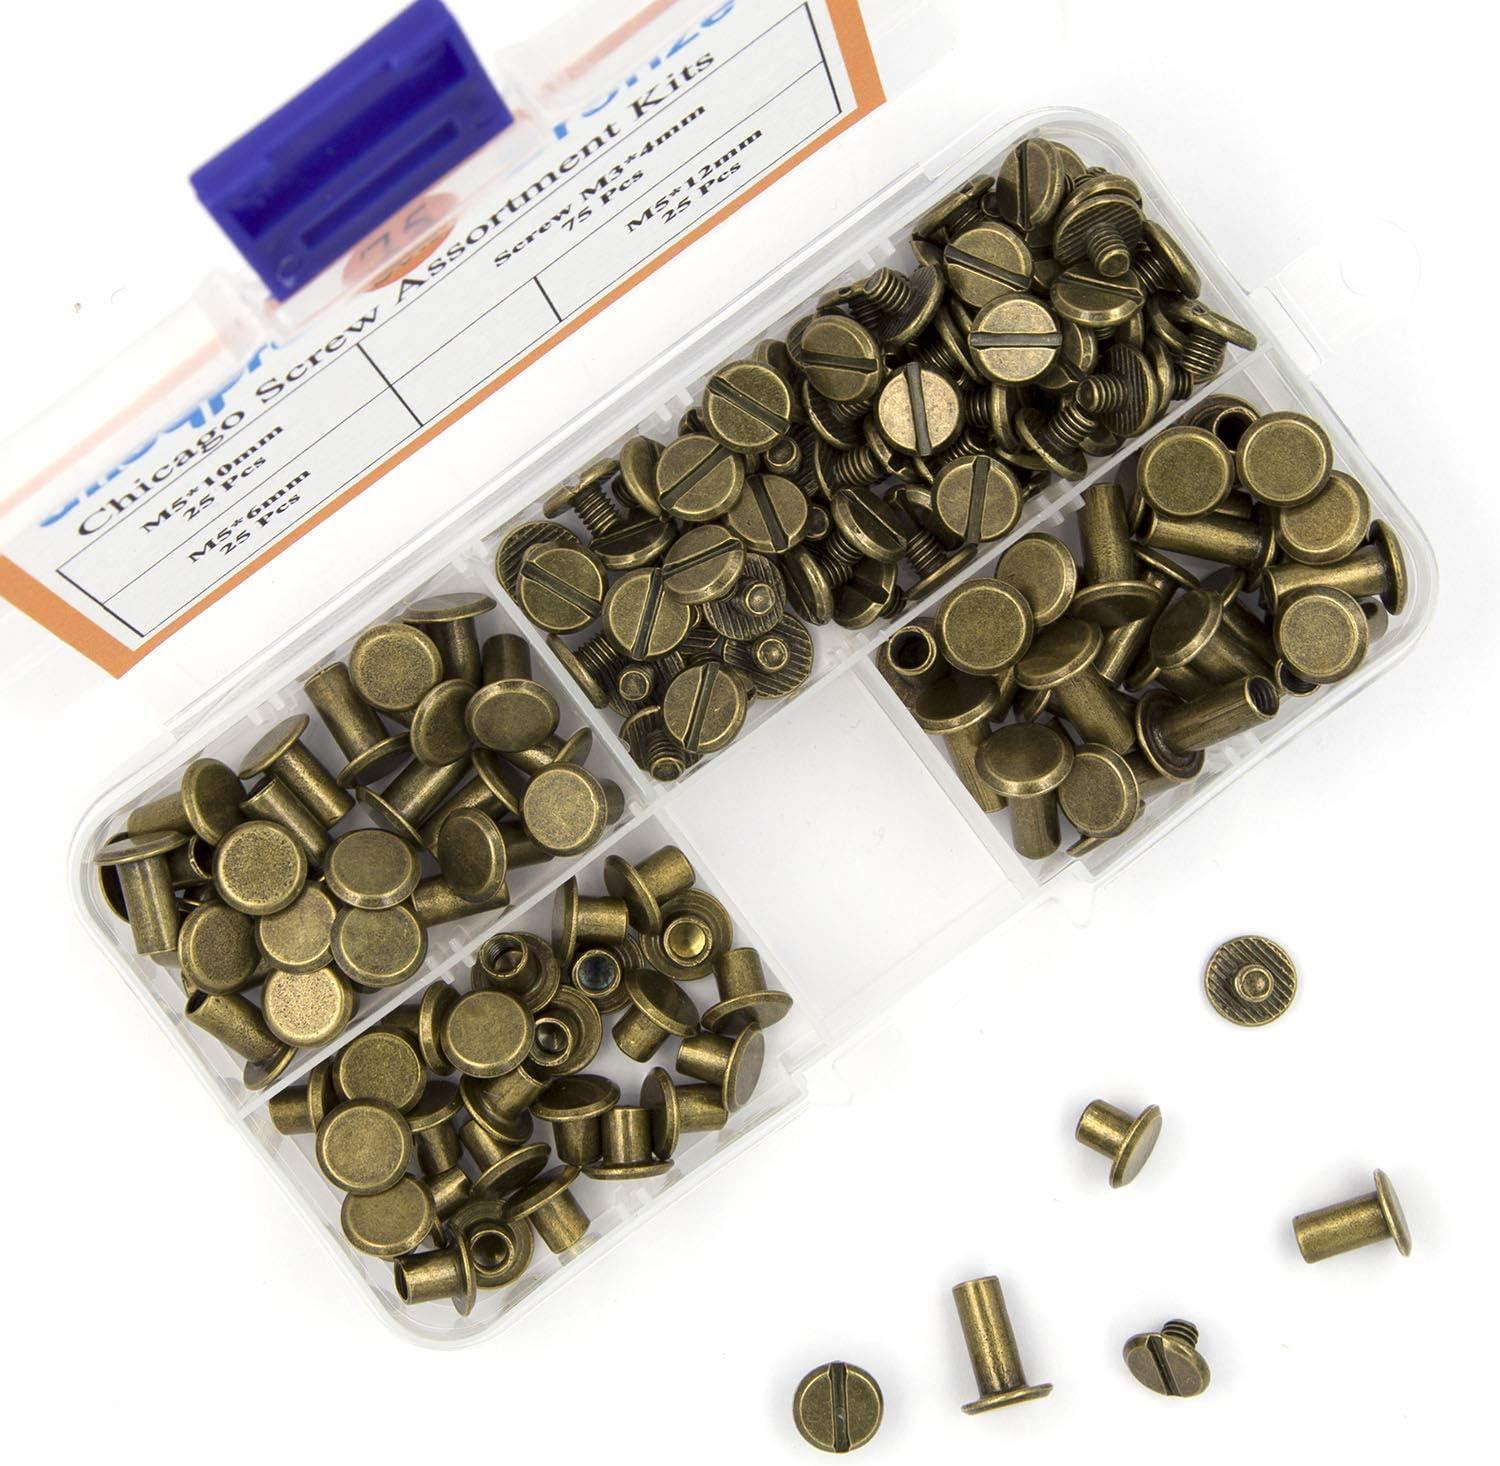  ALLOYGOLD Bronze Chicago Screws Leather Rivets Assorted ，8  Sizes of Screw Rivets Chicago Screws for Decorate and Repair Leather Craft  Belt Bag Shoes Purse Bookbinding (M5*4,5,6,7,8,9,10,12) : Industrial &  Scientific